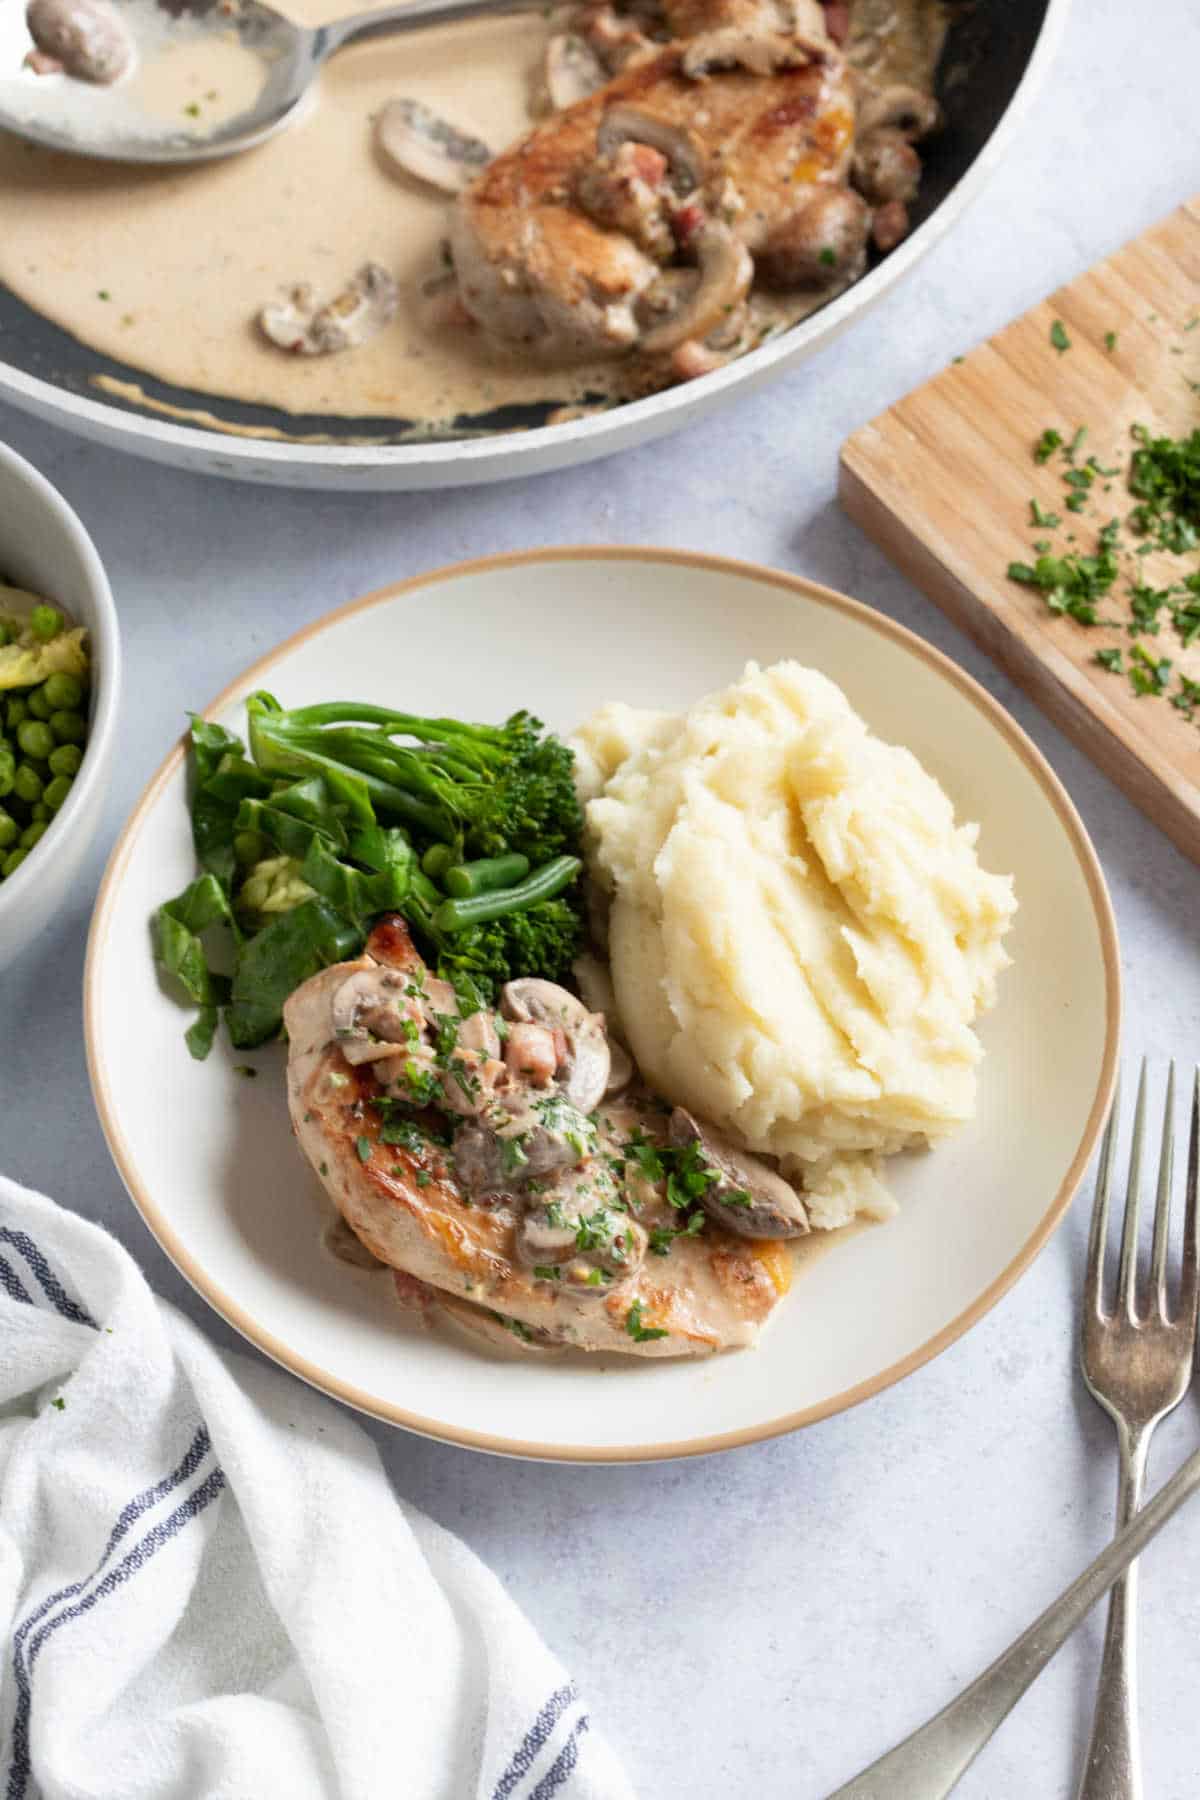 Pan fried pheasant breasts in a creamy sauce with mashed potato and green vegetables.